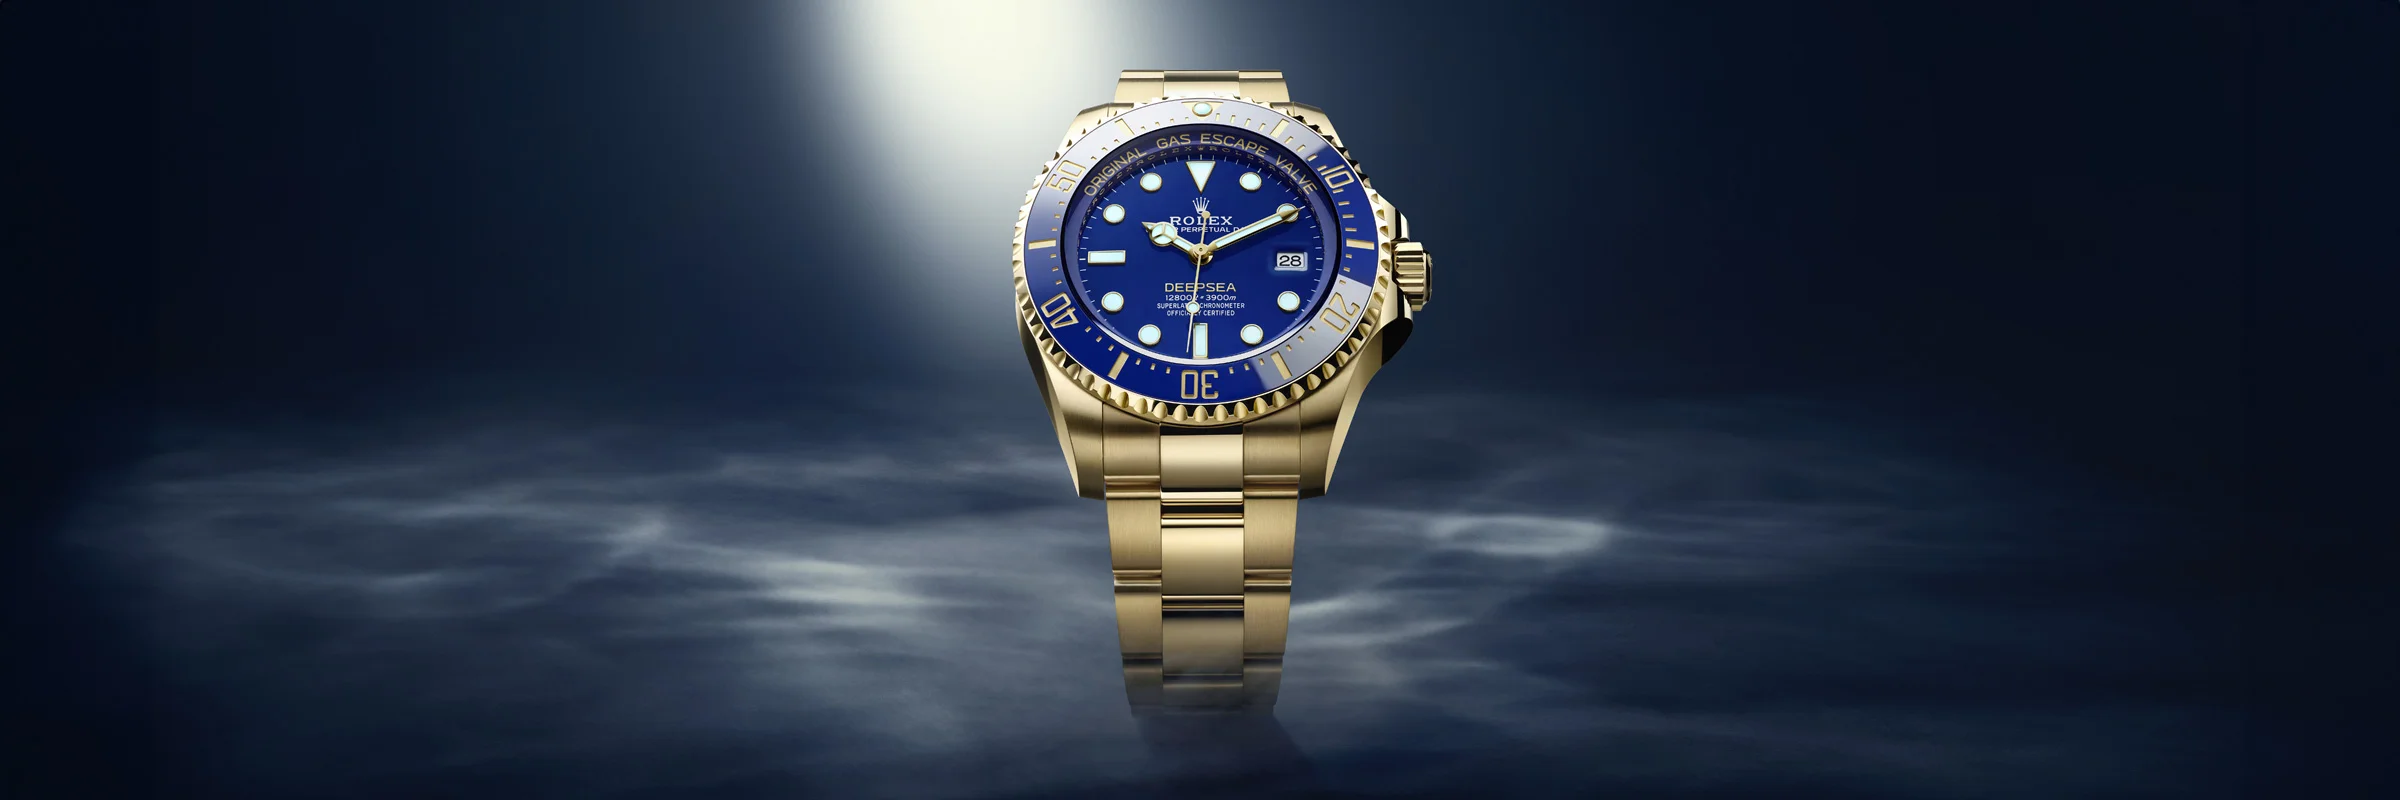 Extreme diversâ€™ watches